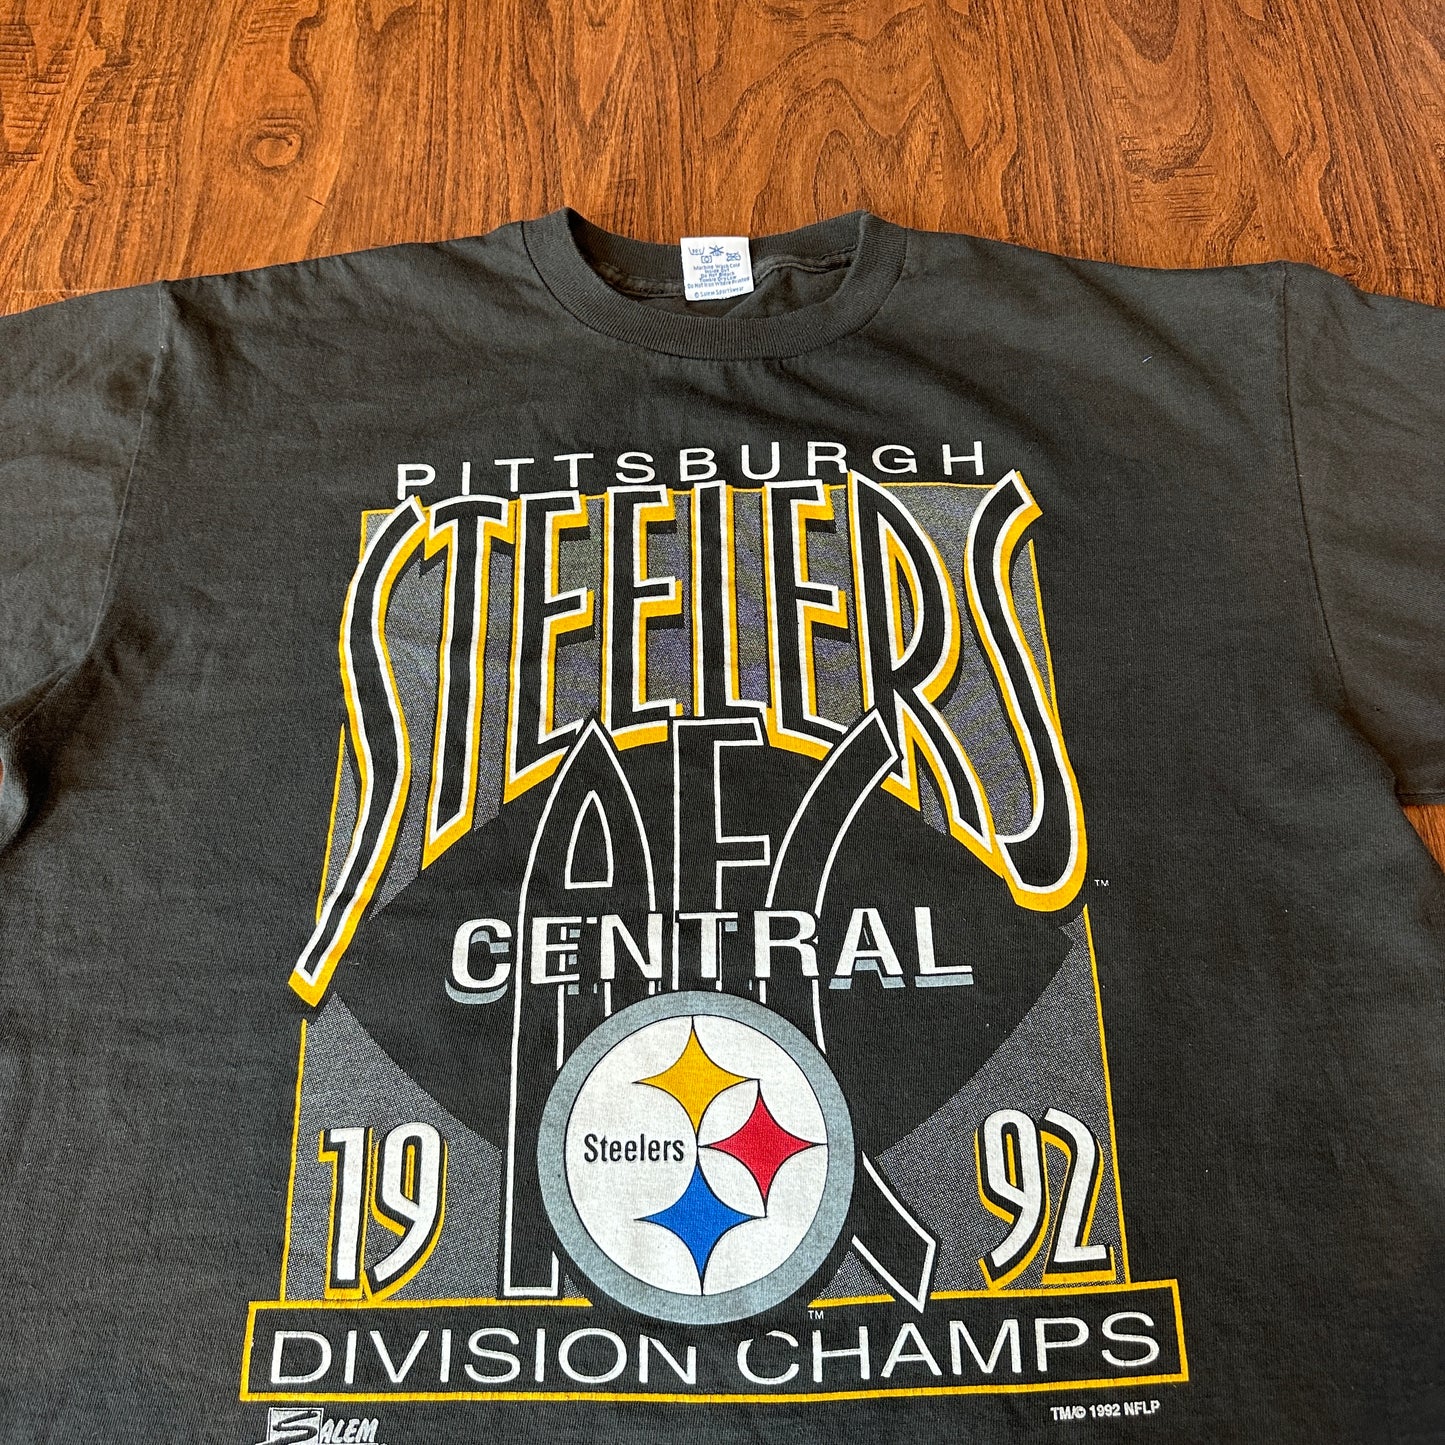 *VINTAGE* Pittsburgh Steelers 1992 Division Champs (FITS Large/XL)